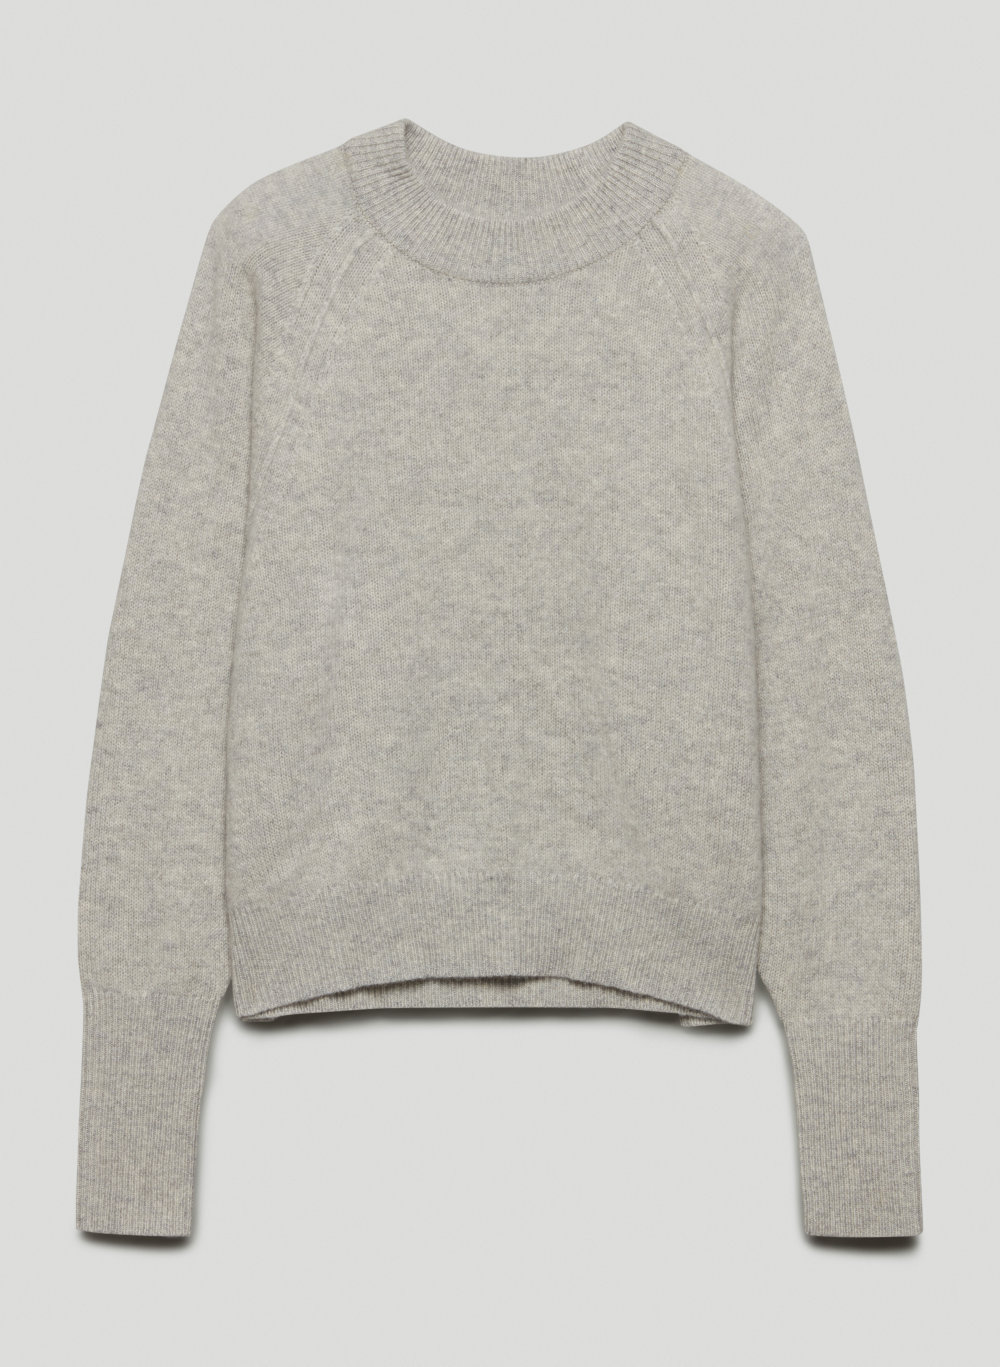 The Group by Babaton LUXE CASHMERE CLASSIC CREW | Aritzia INTL